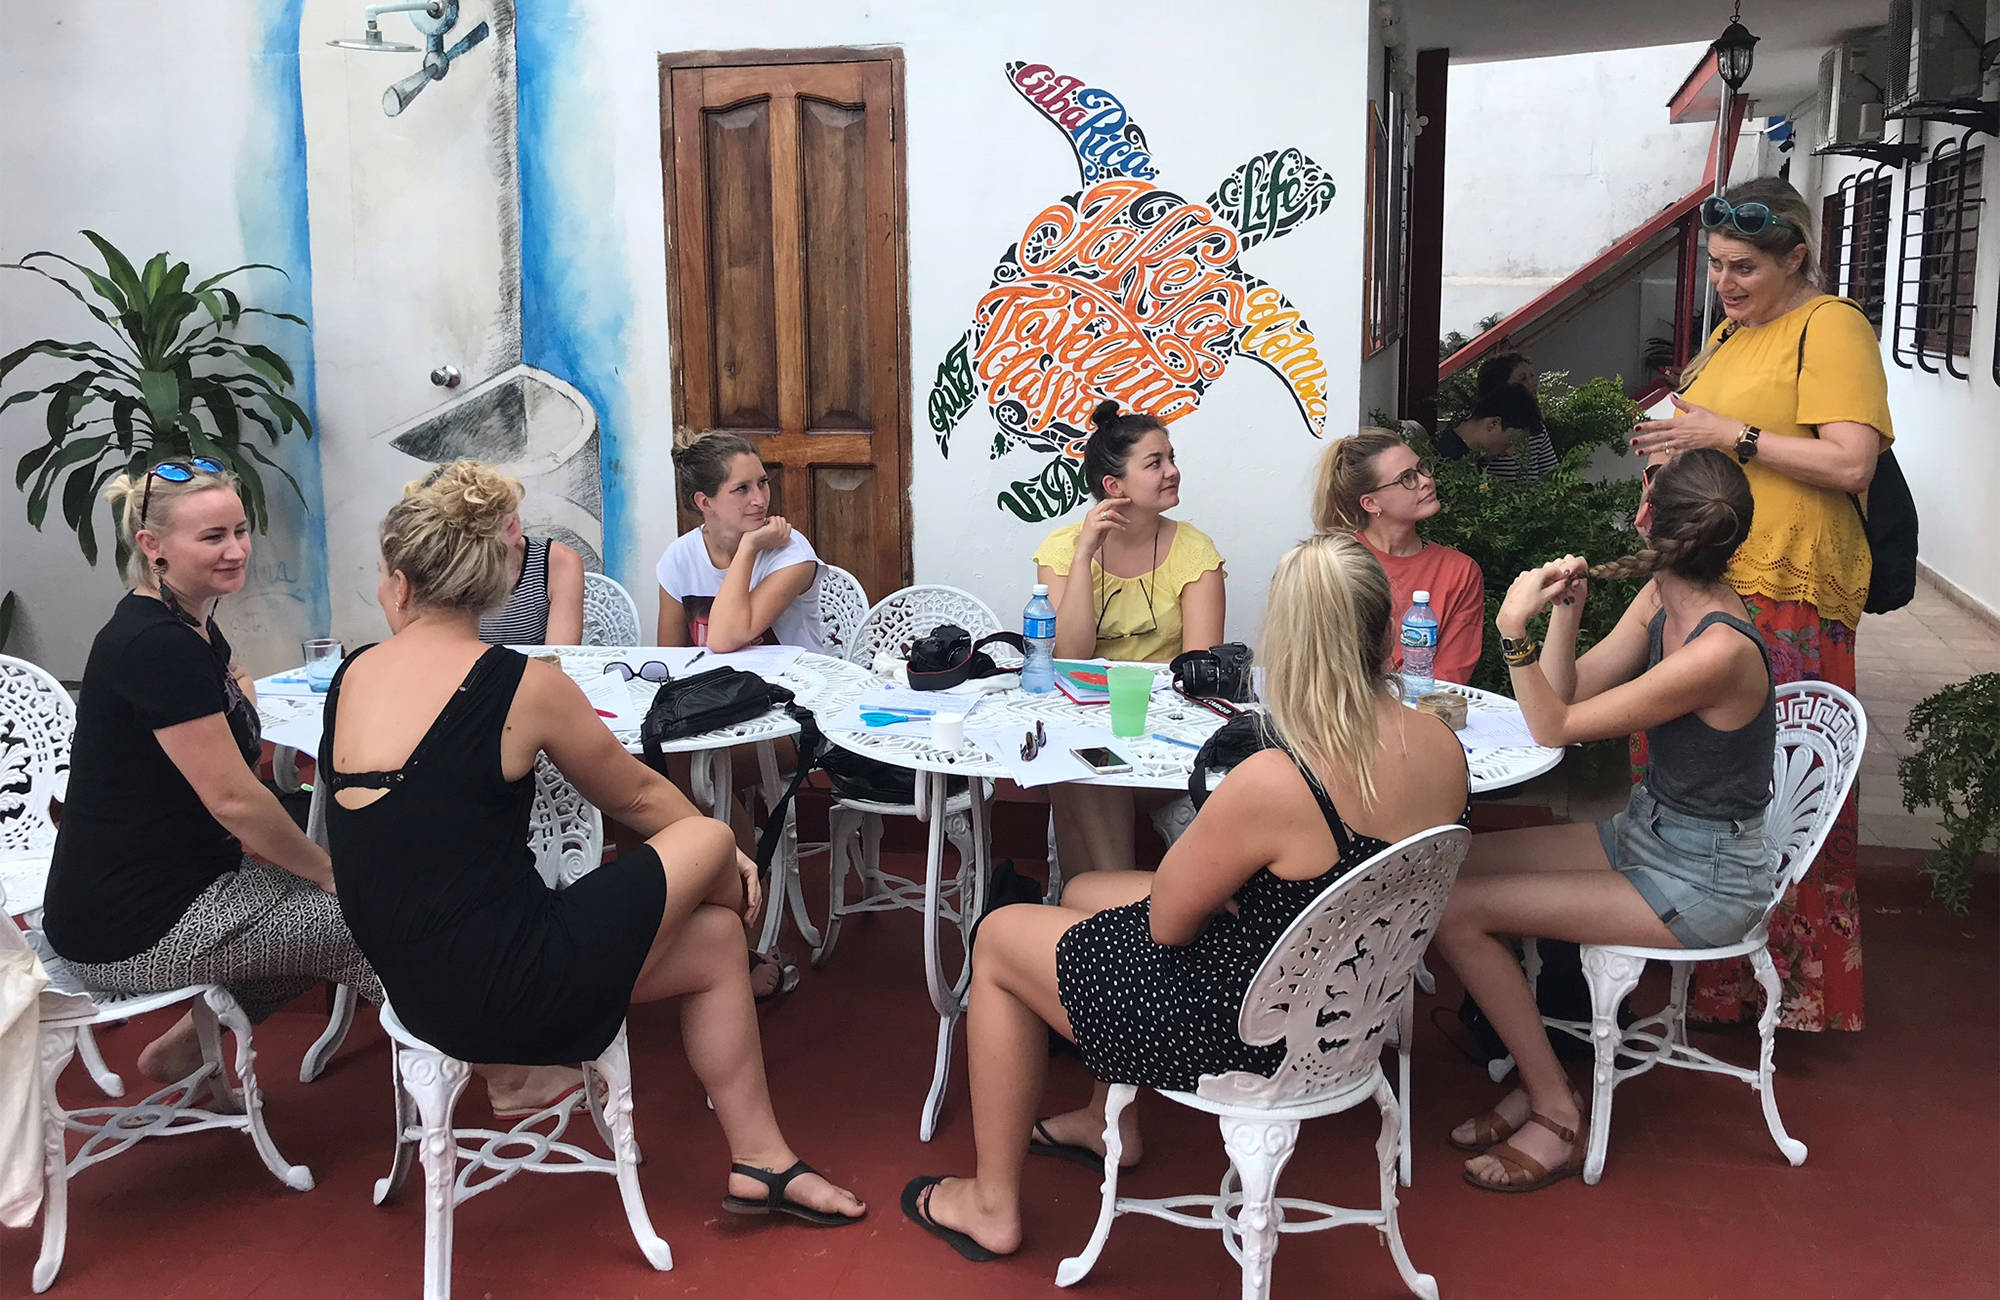 learn spanish while you're in costa rica